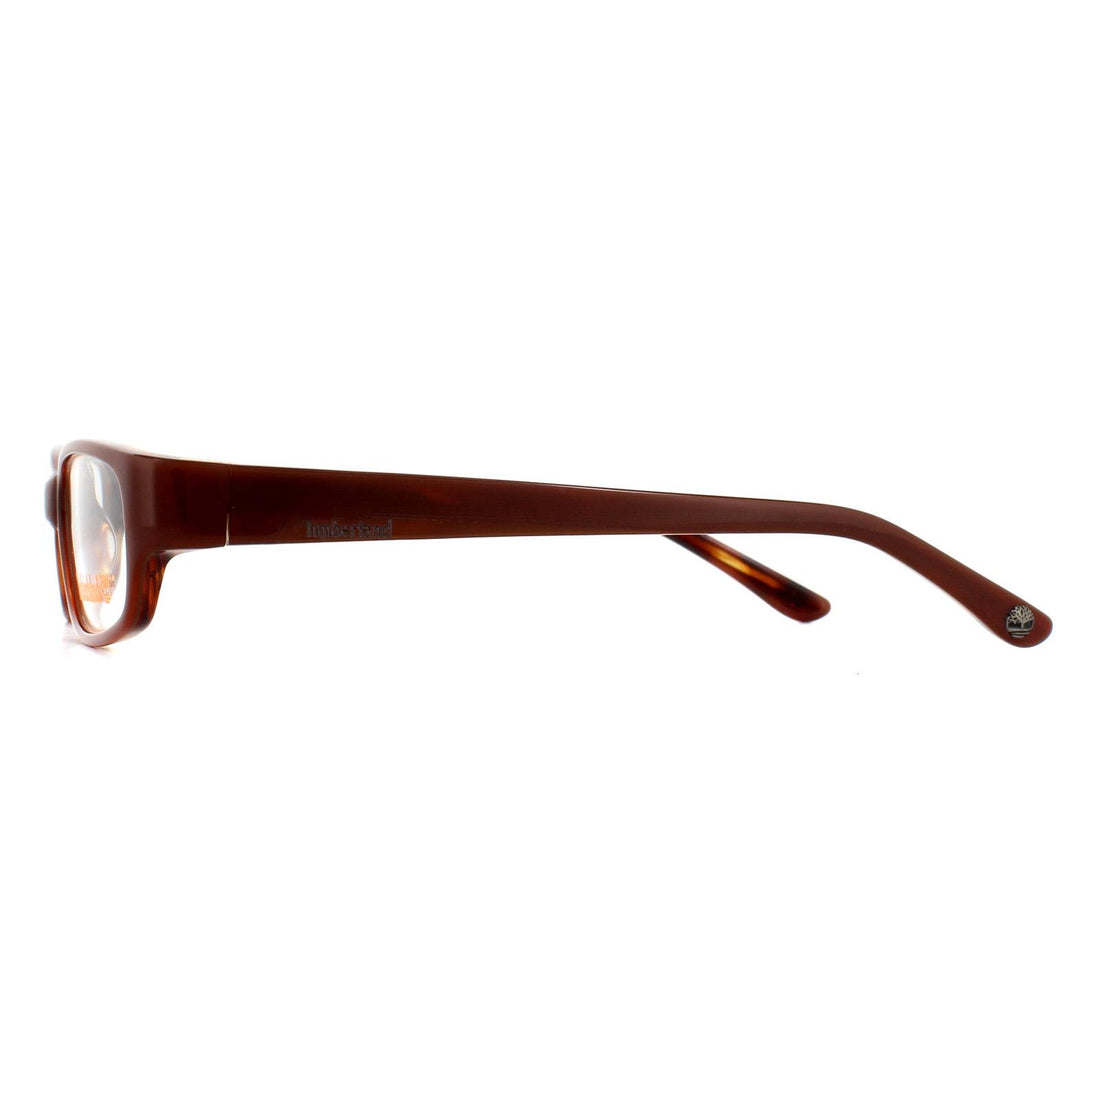 Timberland Glasses Frames TB5052 050 Brown